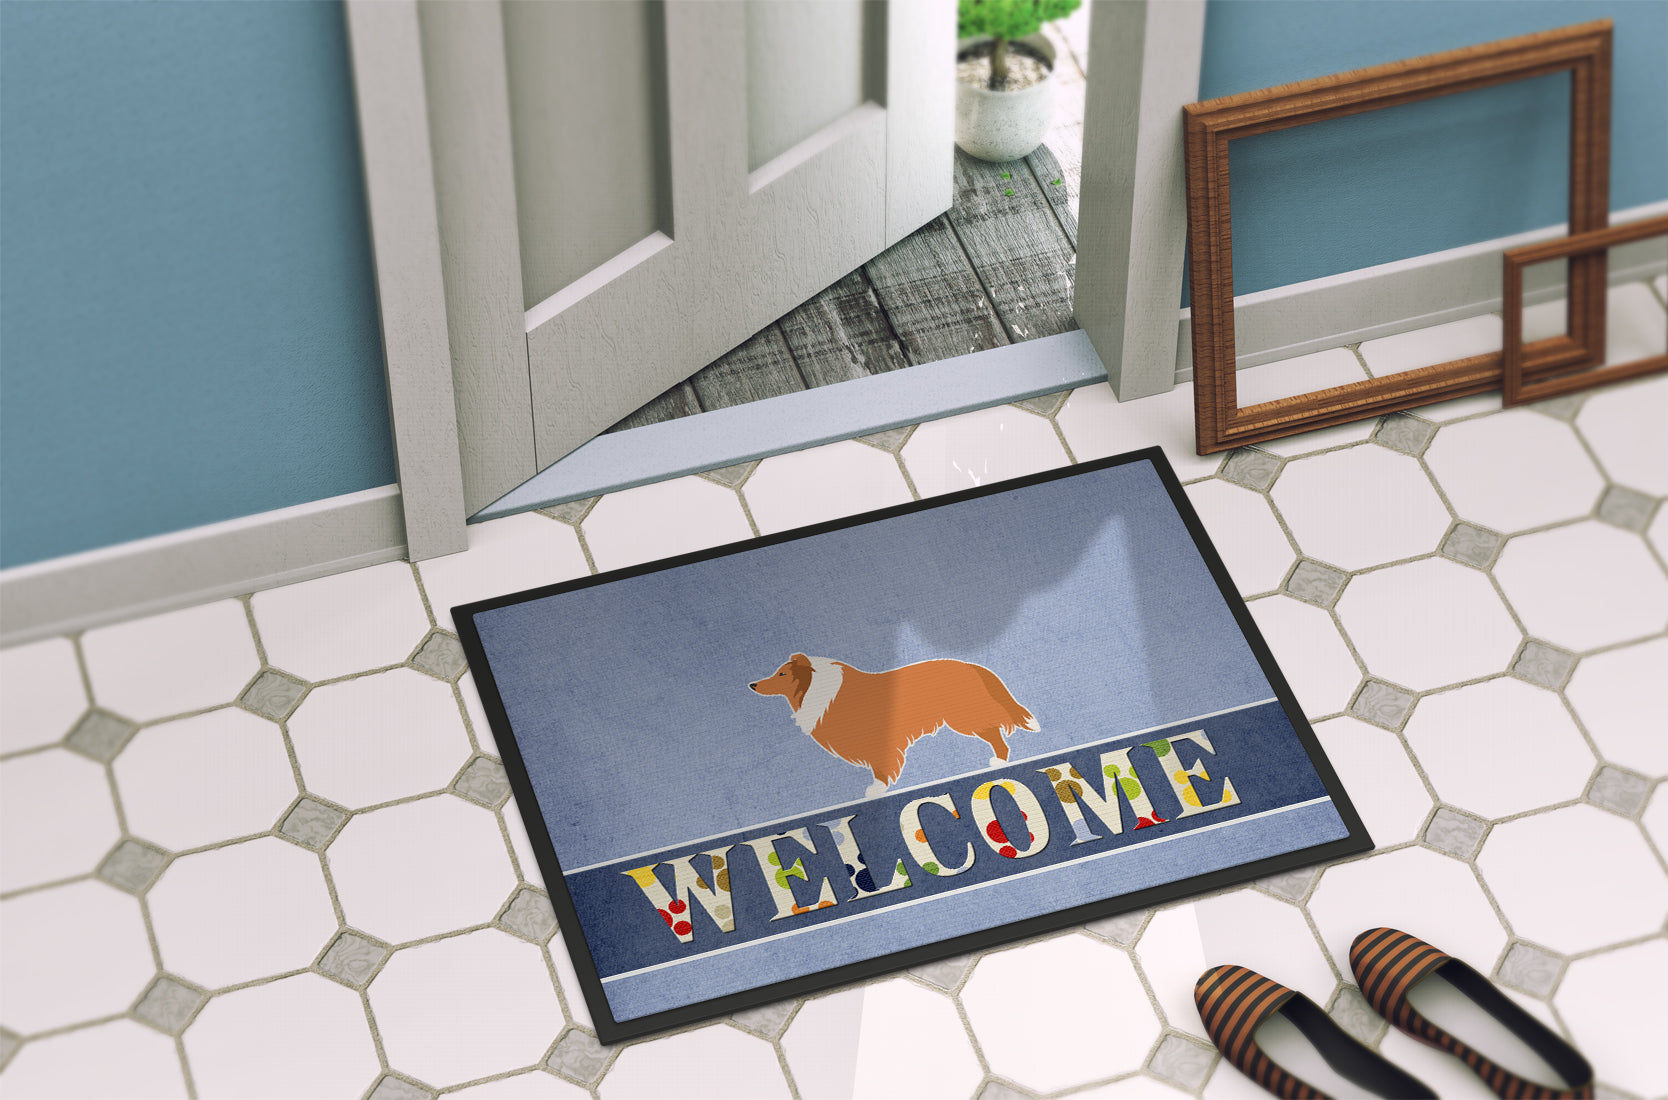 Collie Welcome Indoor or Outdoor Mat 18x27 BB5520MAT - the-store.com